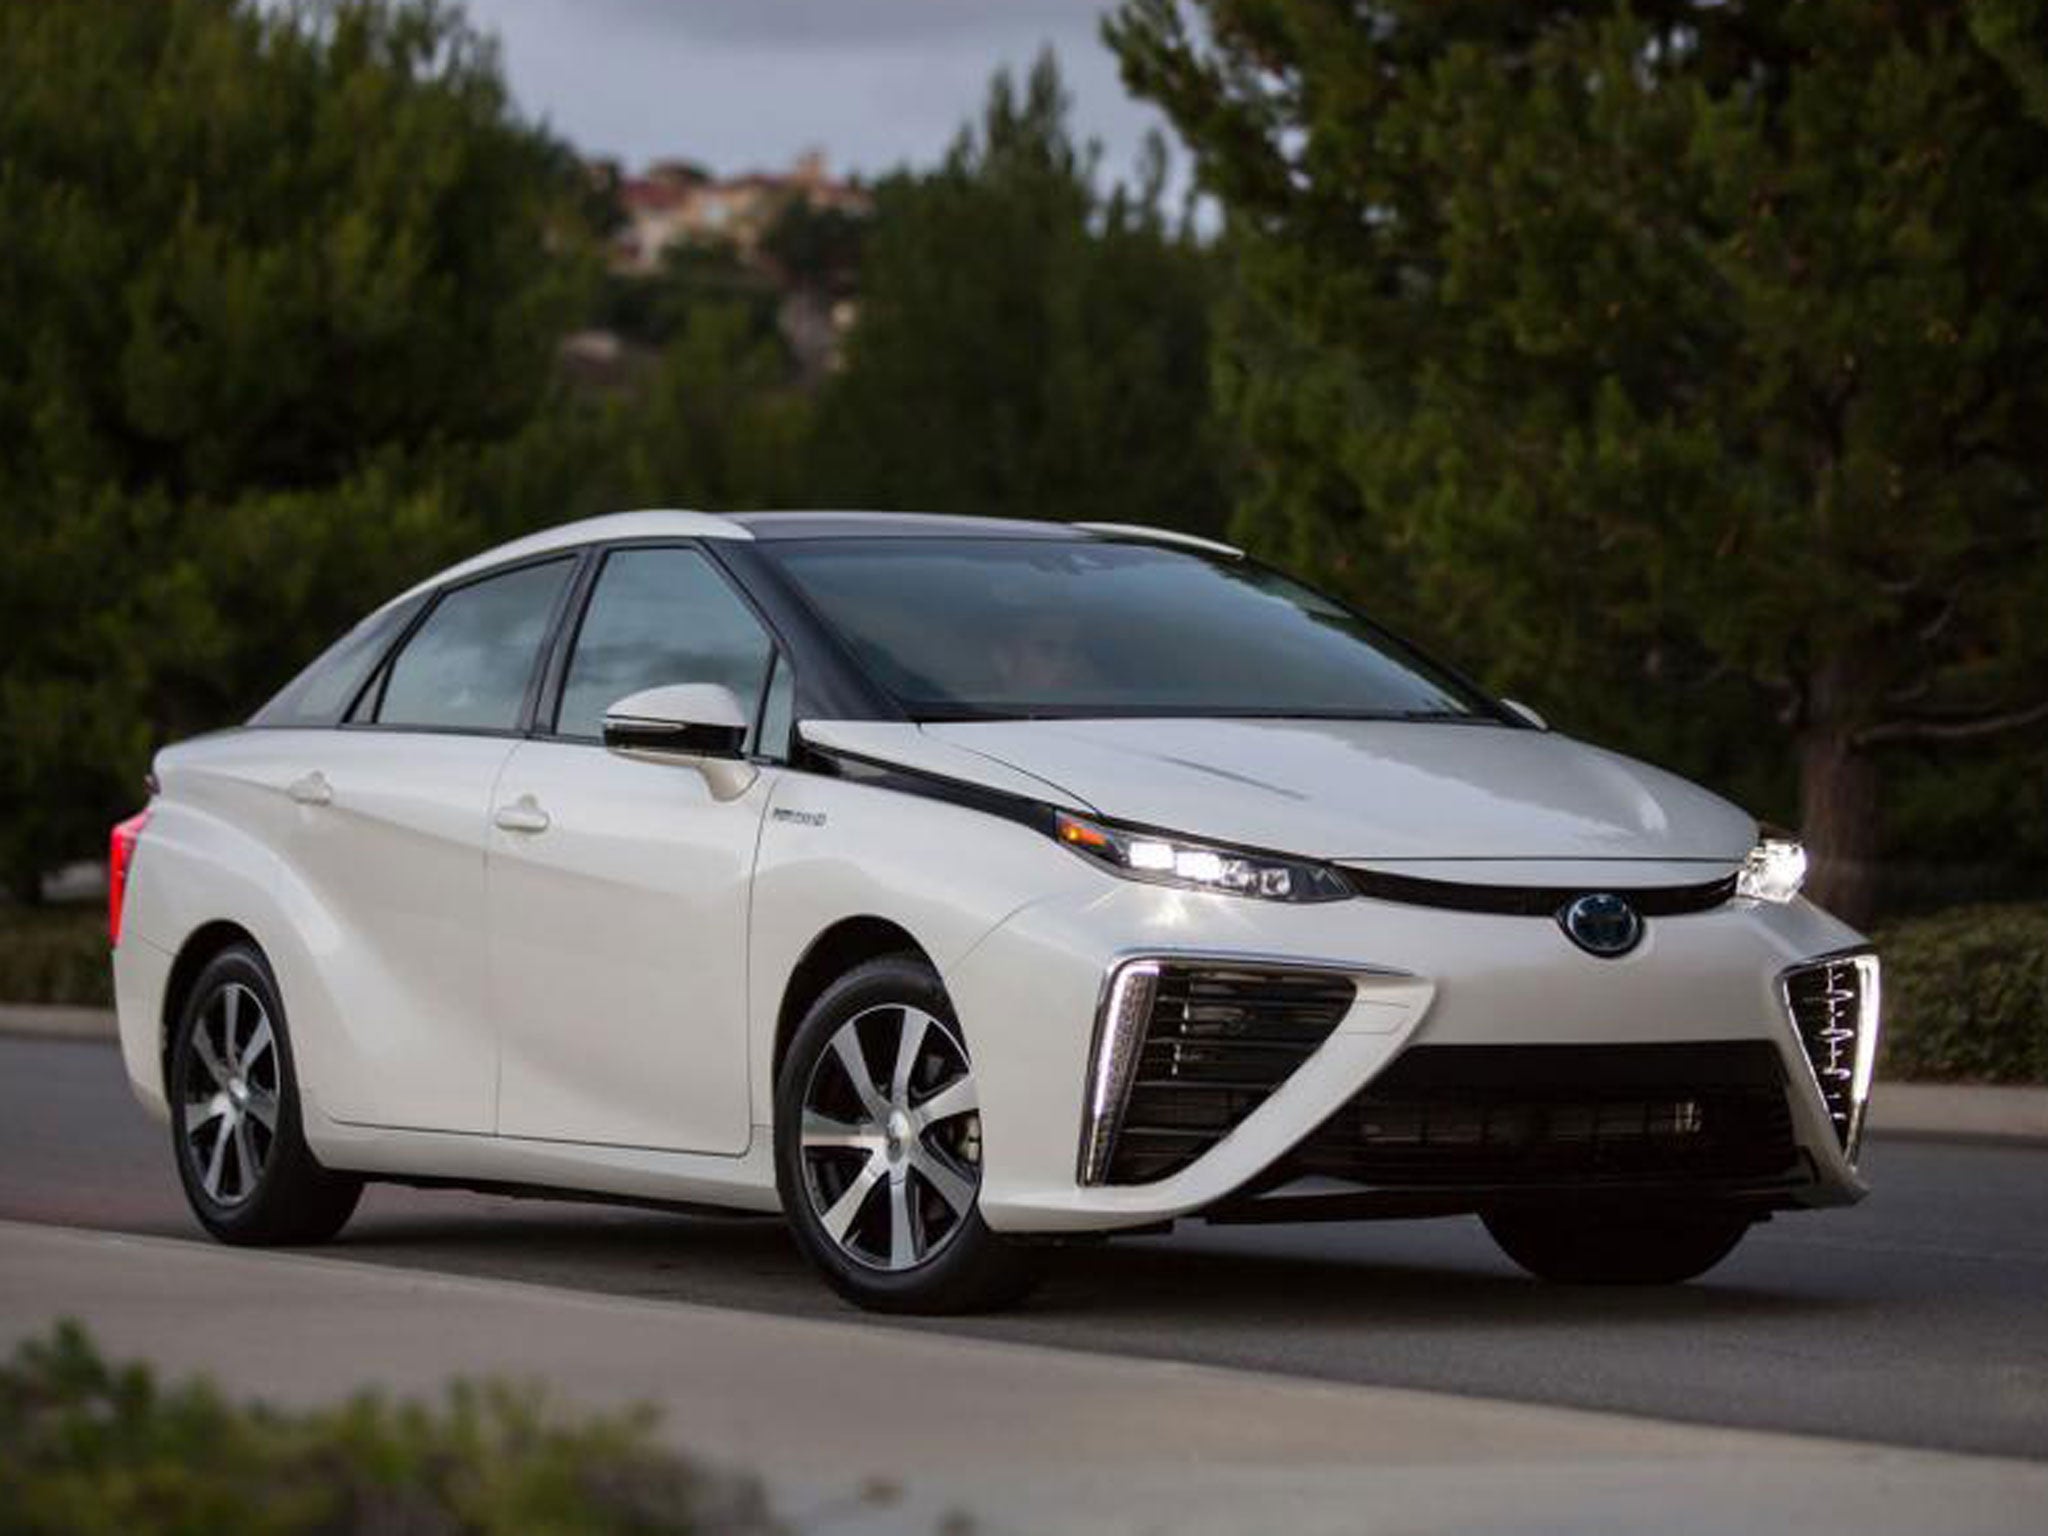 The arrival of the Mirai has brought the fuel cell revolution that bit closer